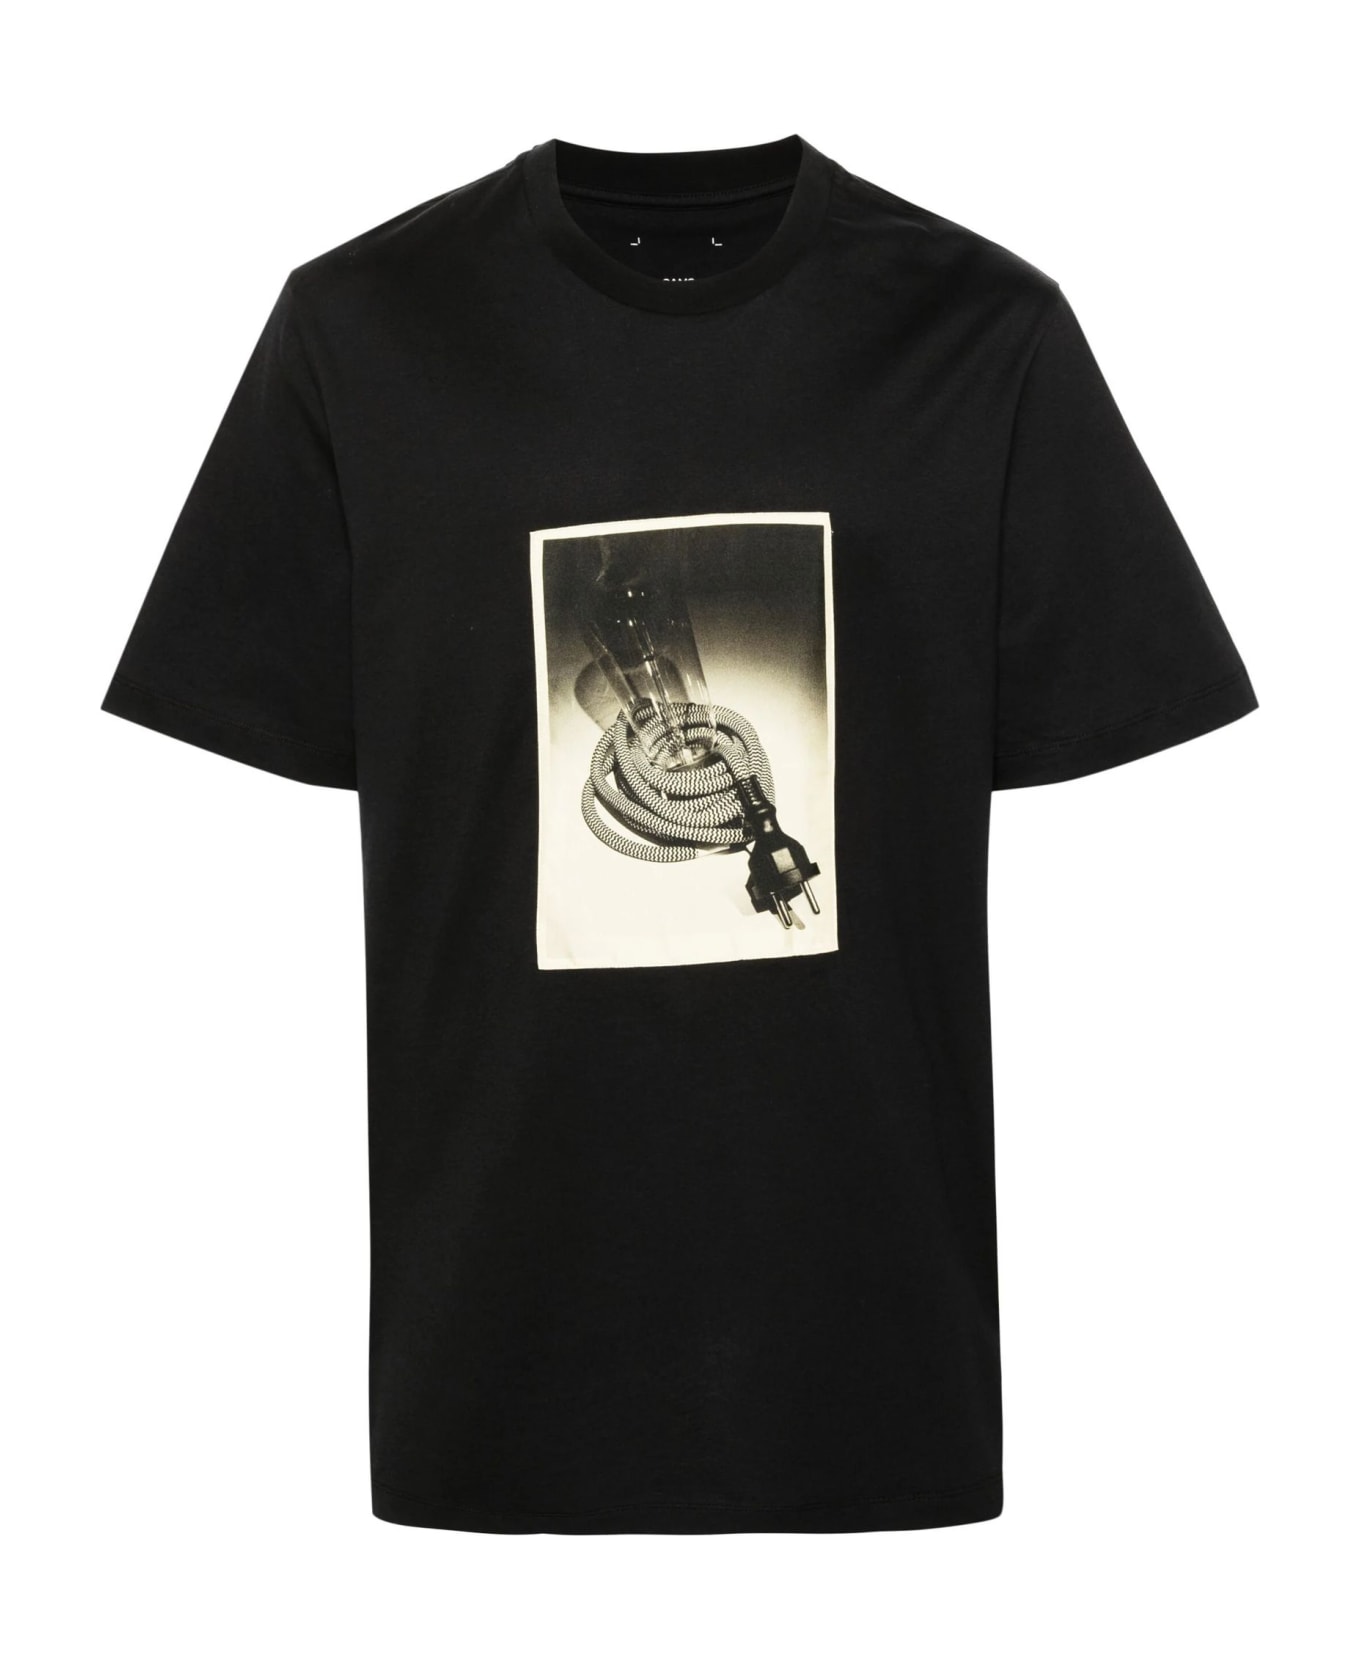 OAMC T-shirts And Polos Black - Black